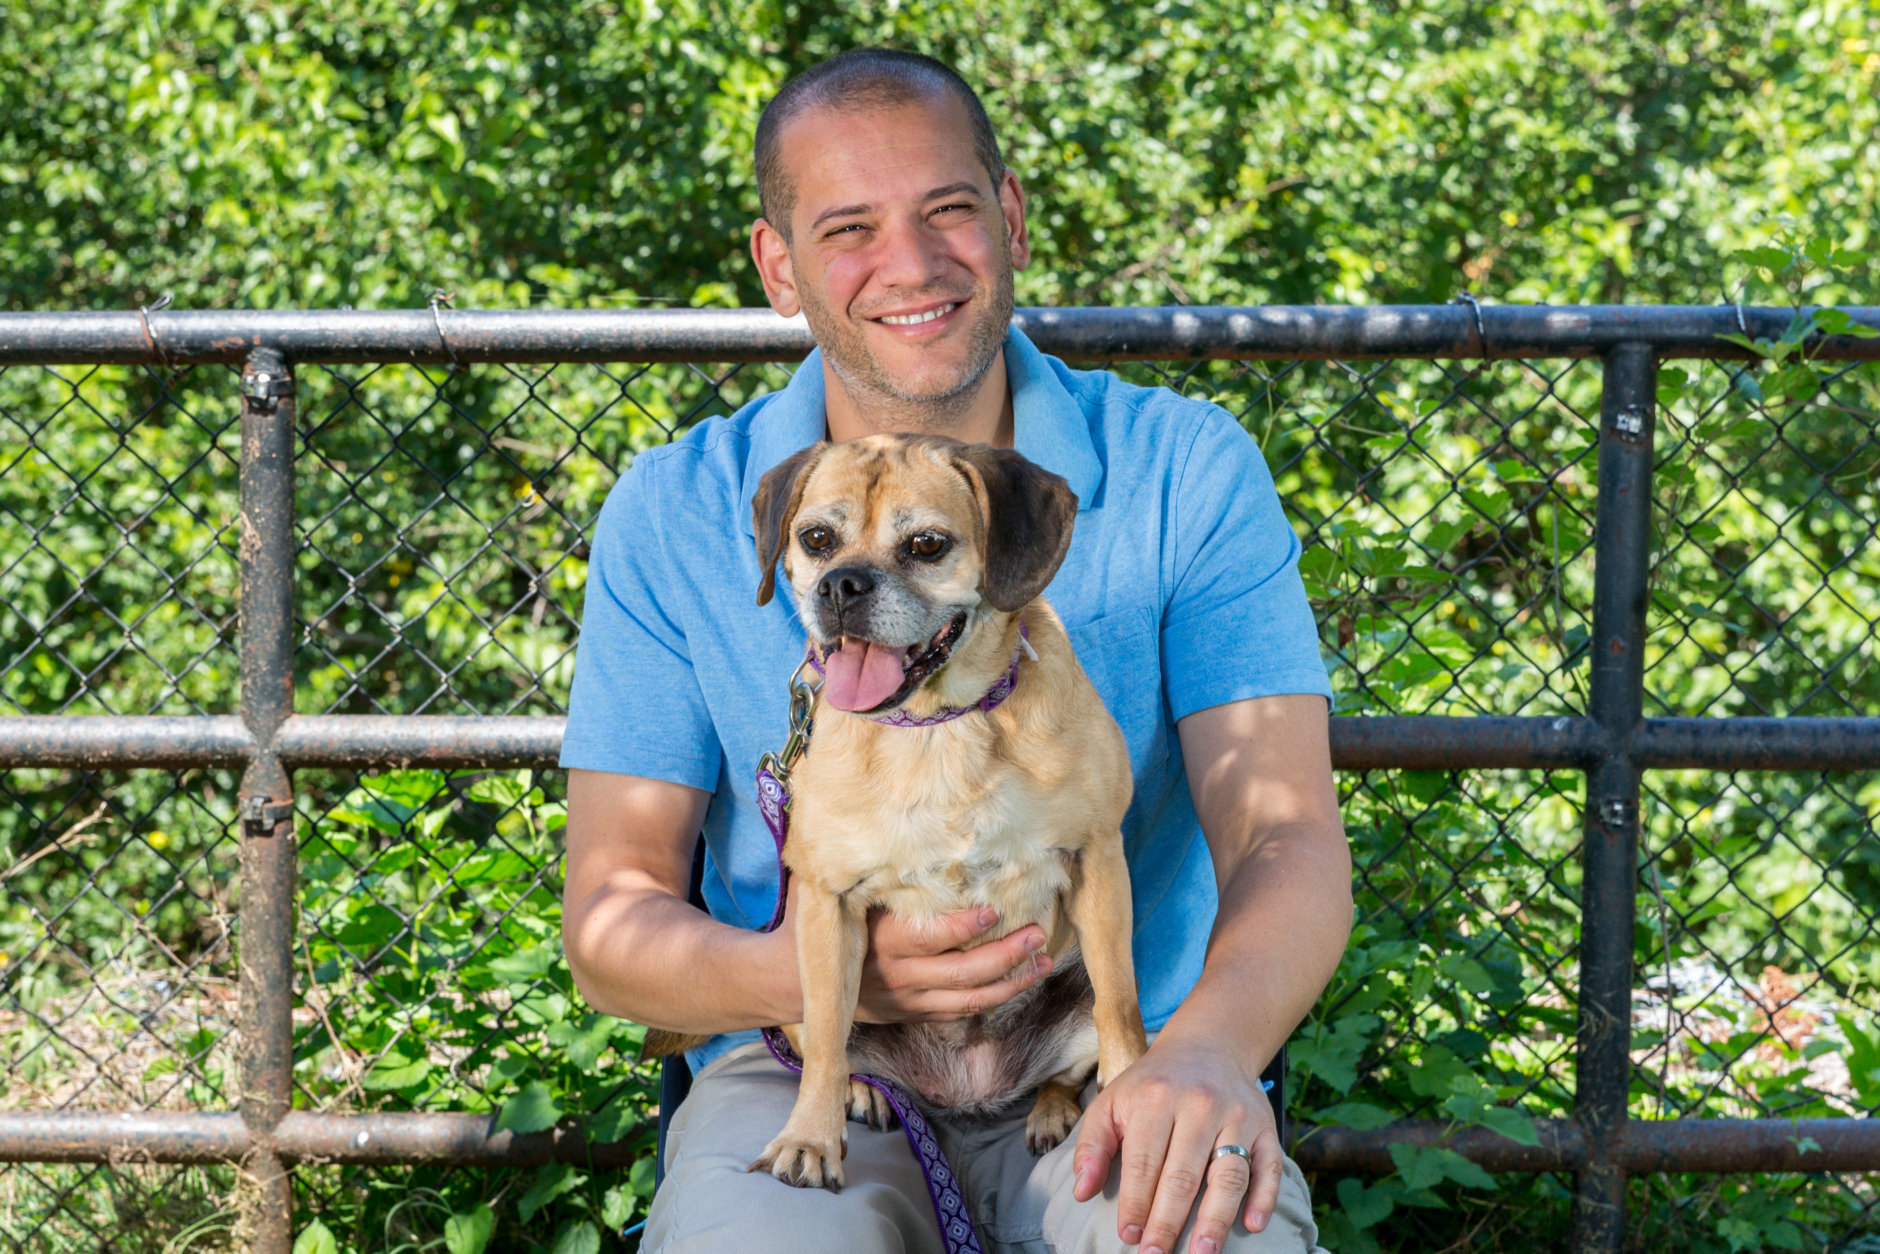 Christopher Rodriguez, the director of D.C.'s Homeland Security and Emergency Management Agency, enjoys the day with his dog Sonoma. (Courtesy Humane Rescue Alliance)